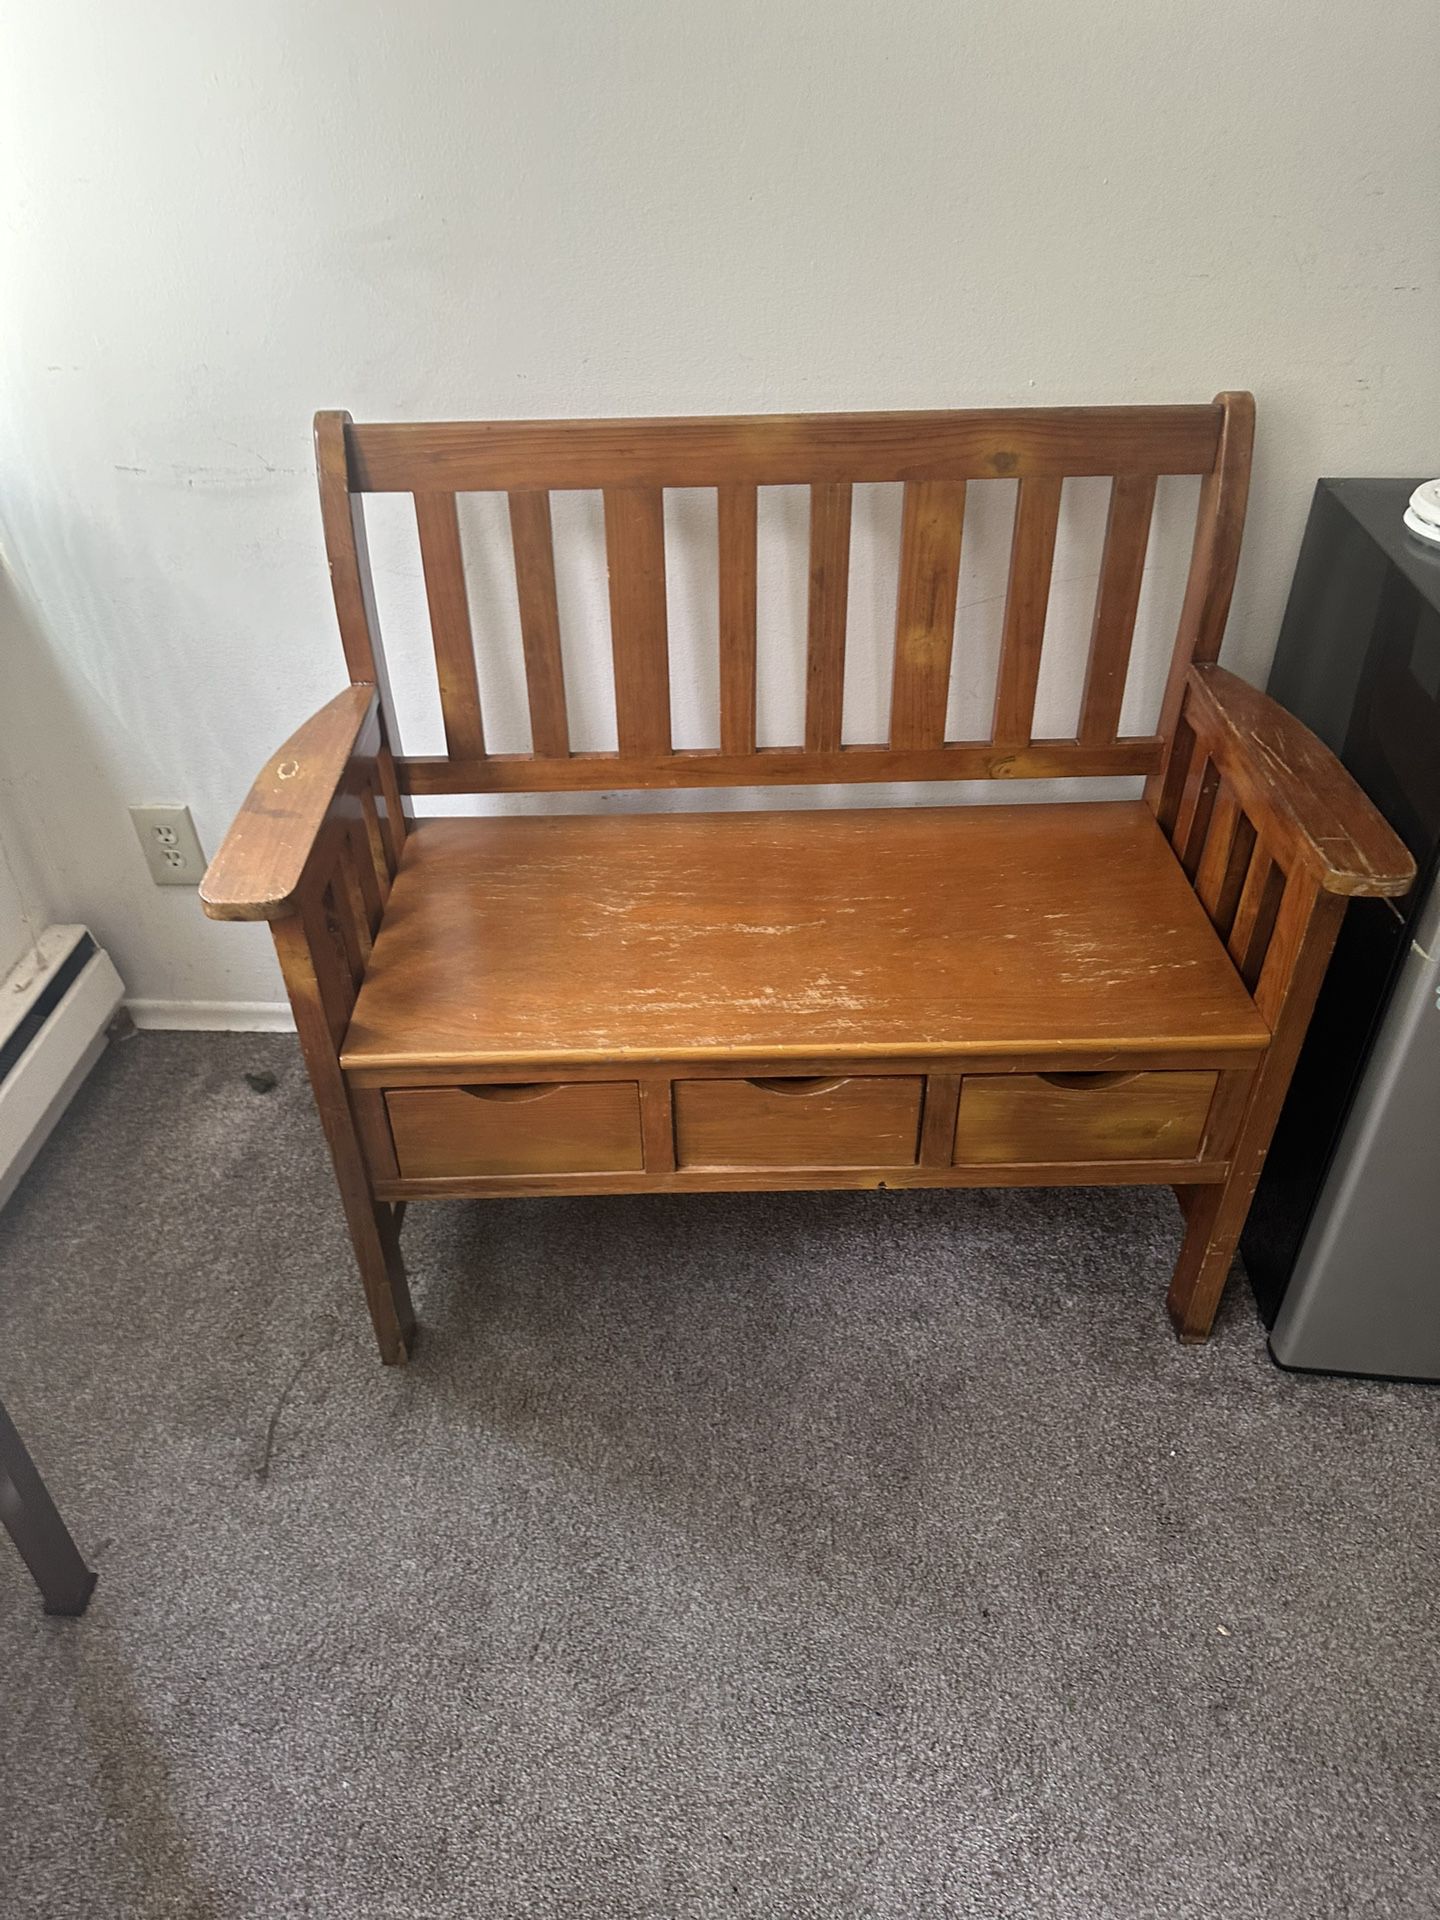 Wood Bench With Drawers